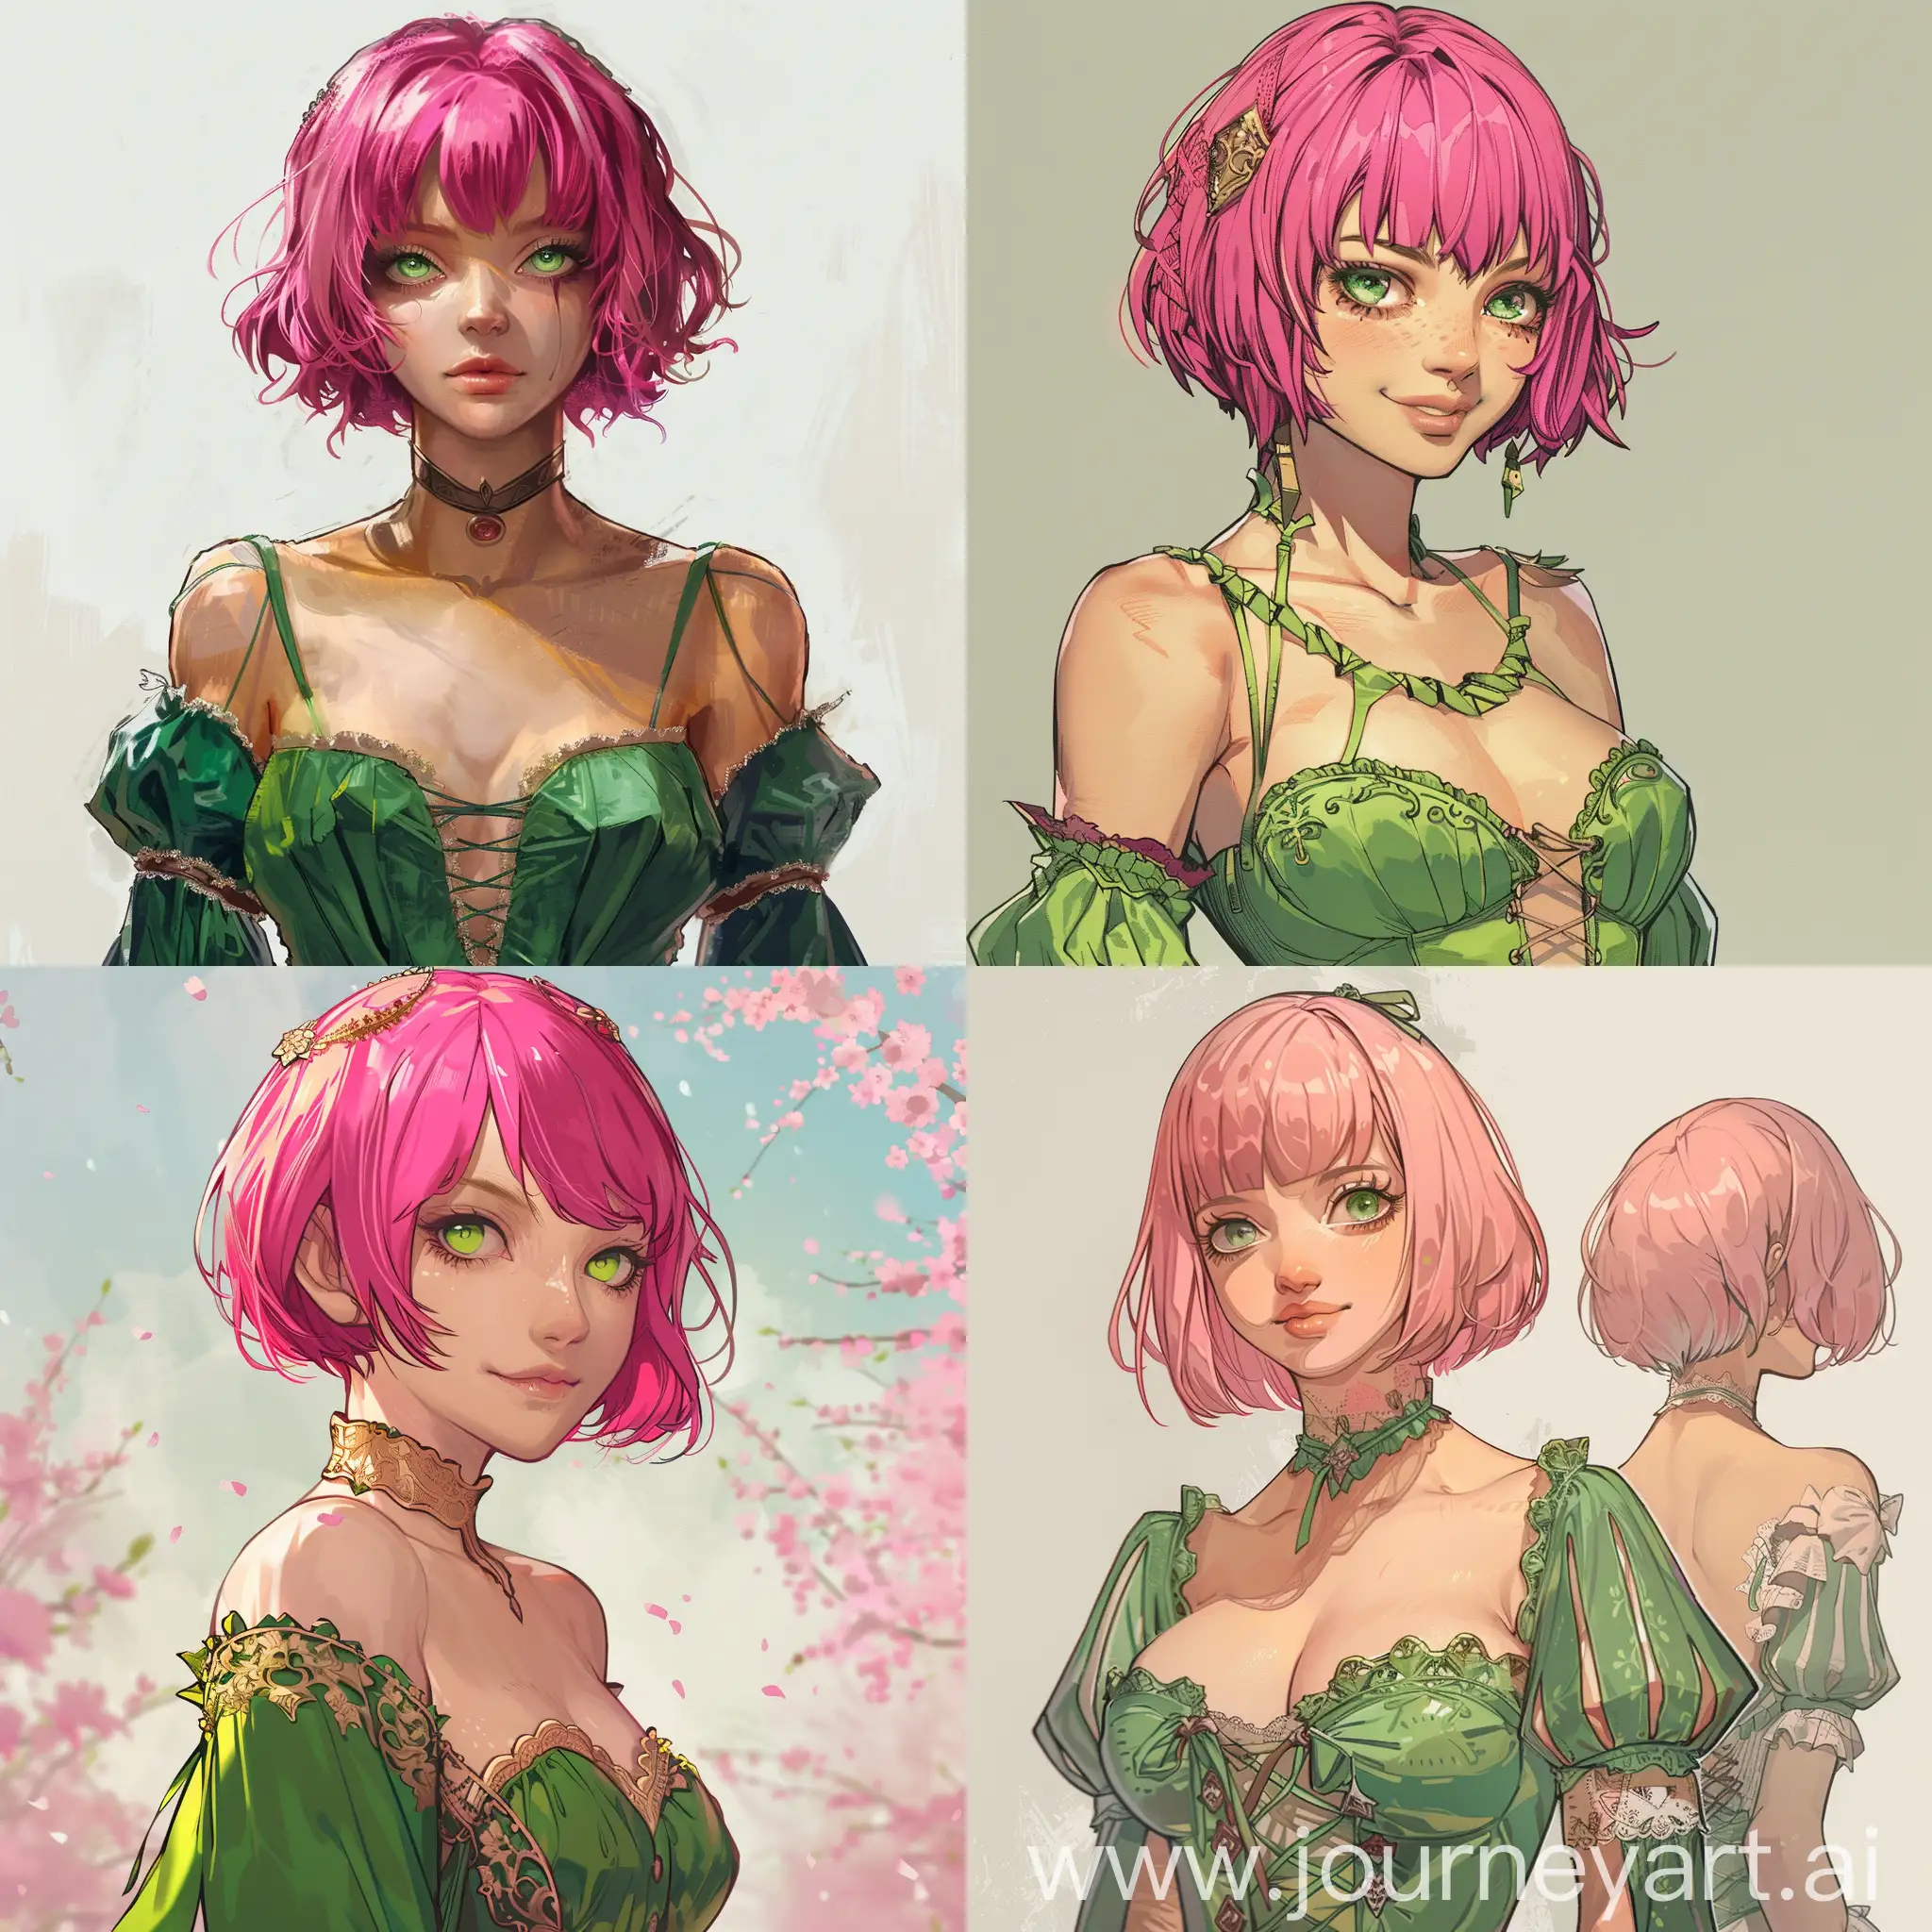 Young-Woman-in-Renaissance-Attire-with-Pink-Hair-and-Green-Dress-Standing-among-Cherry-Blossoms